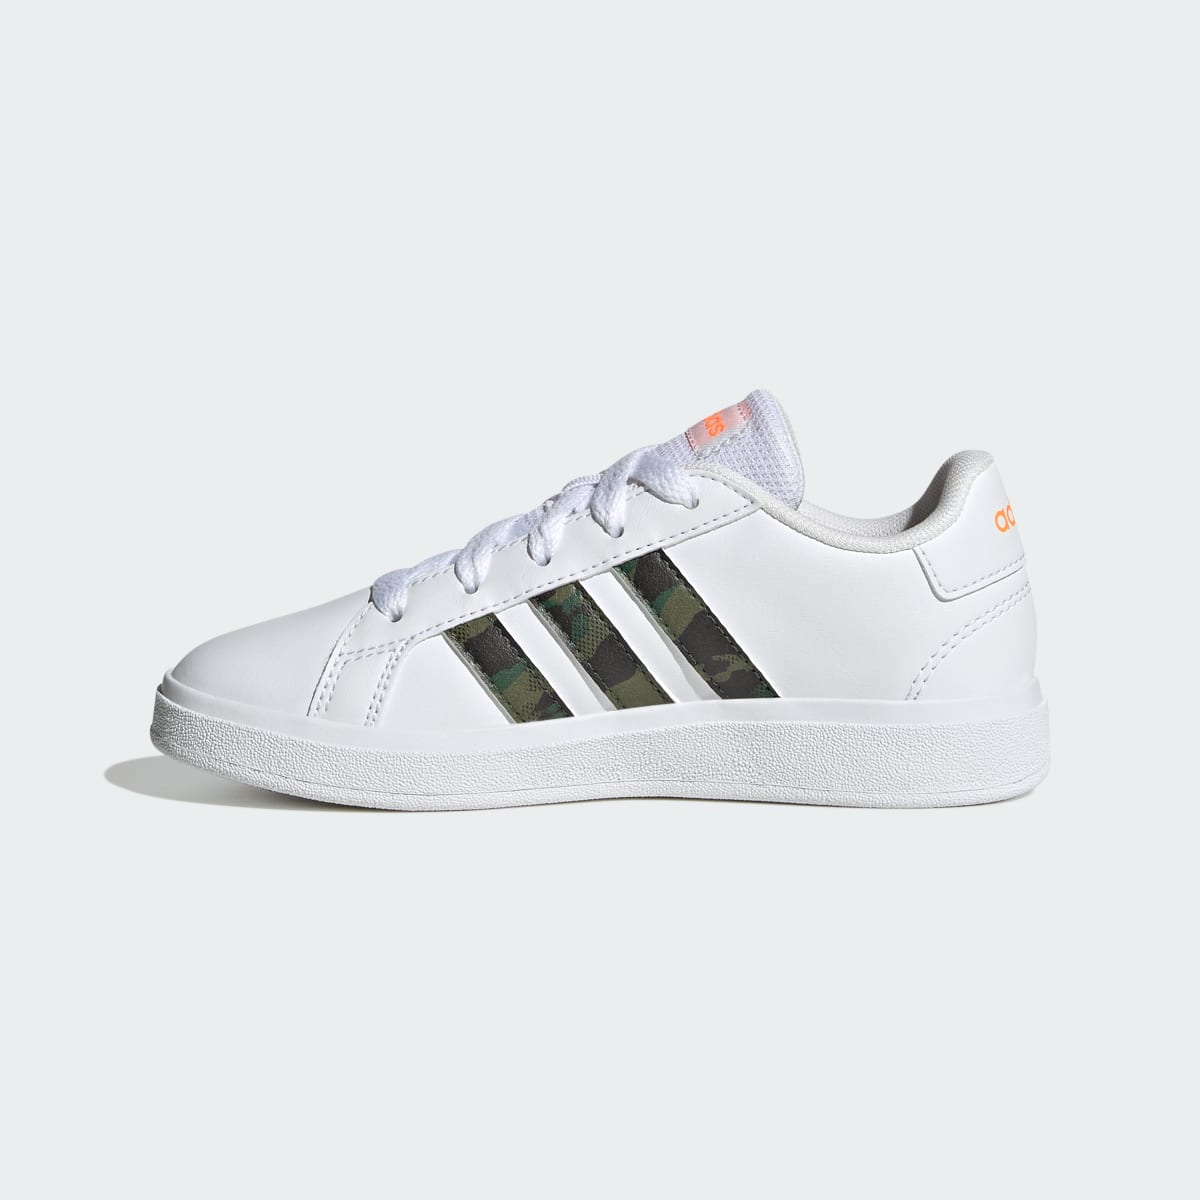 Adidas Grand Court Lifestyle Lace Tennis Schuh. 7